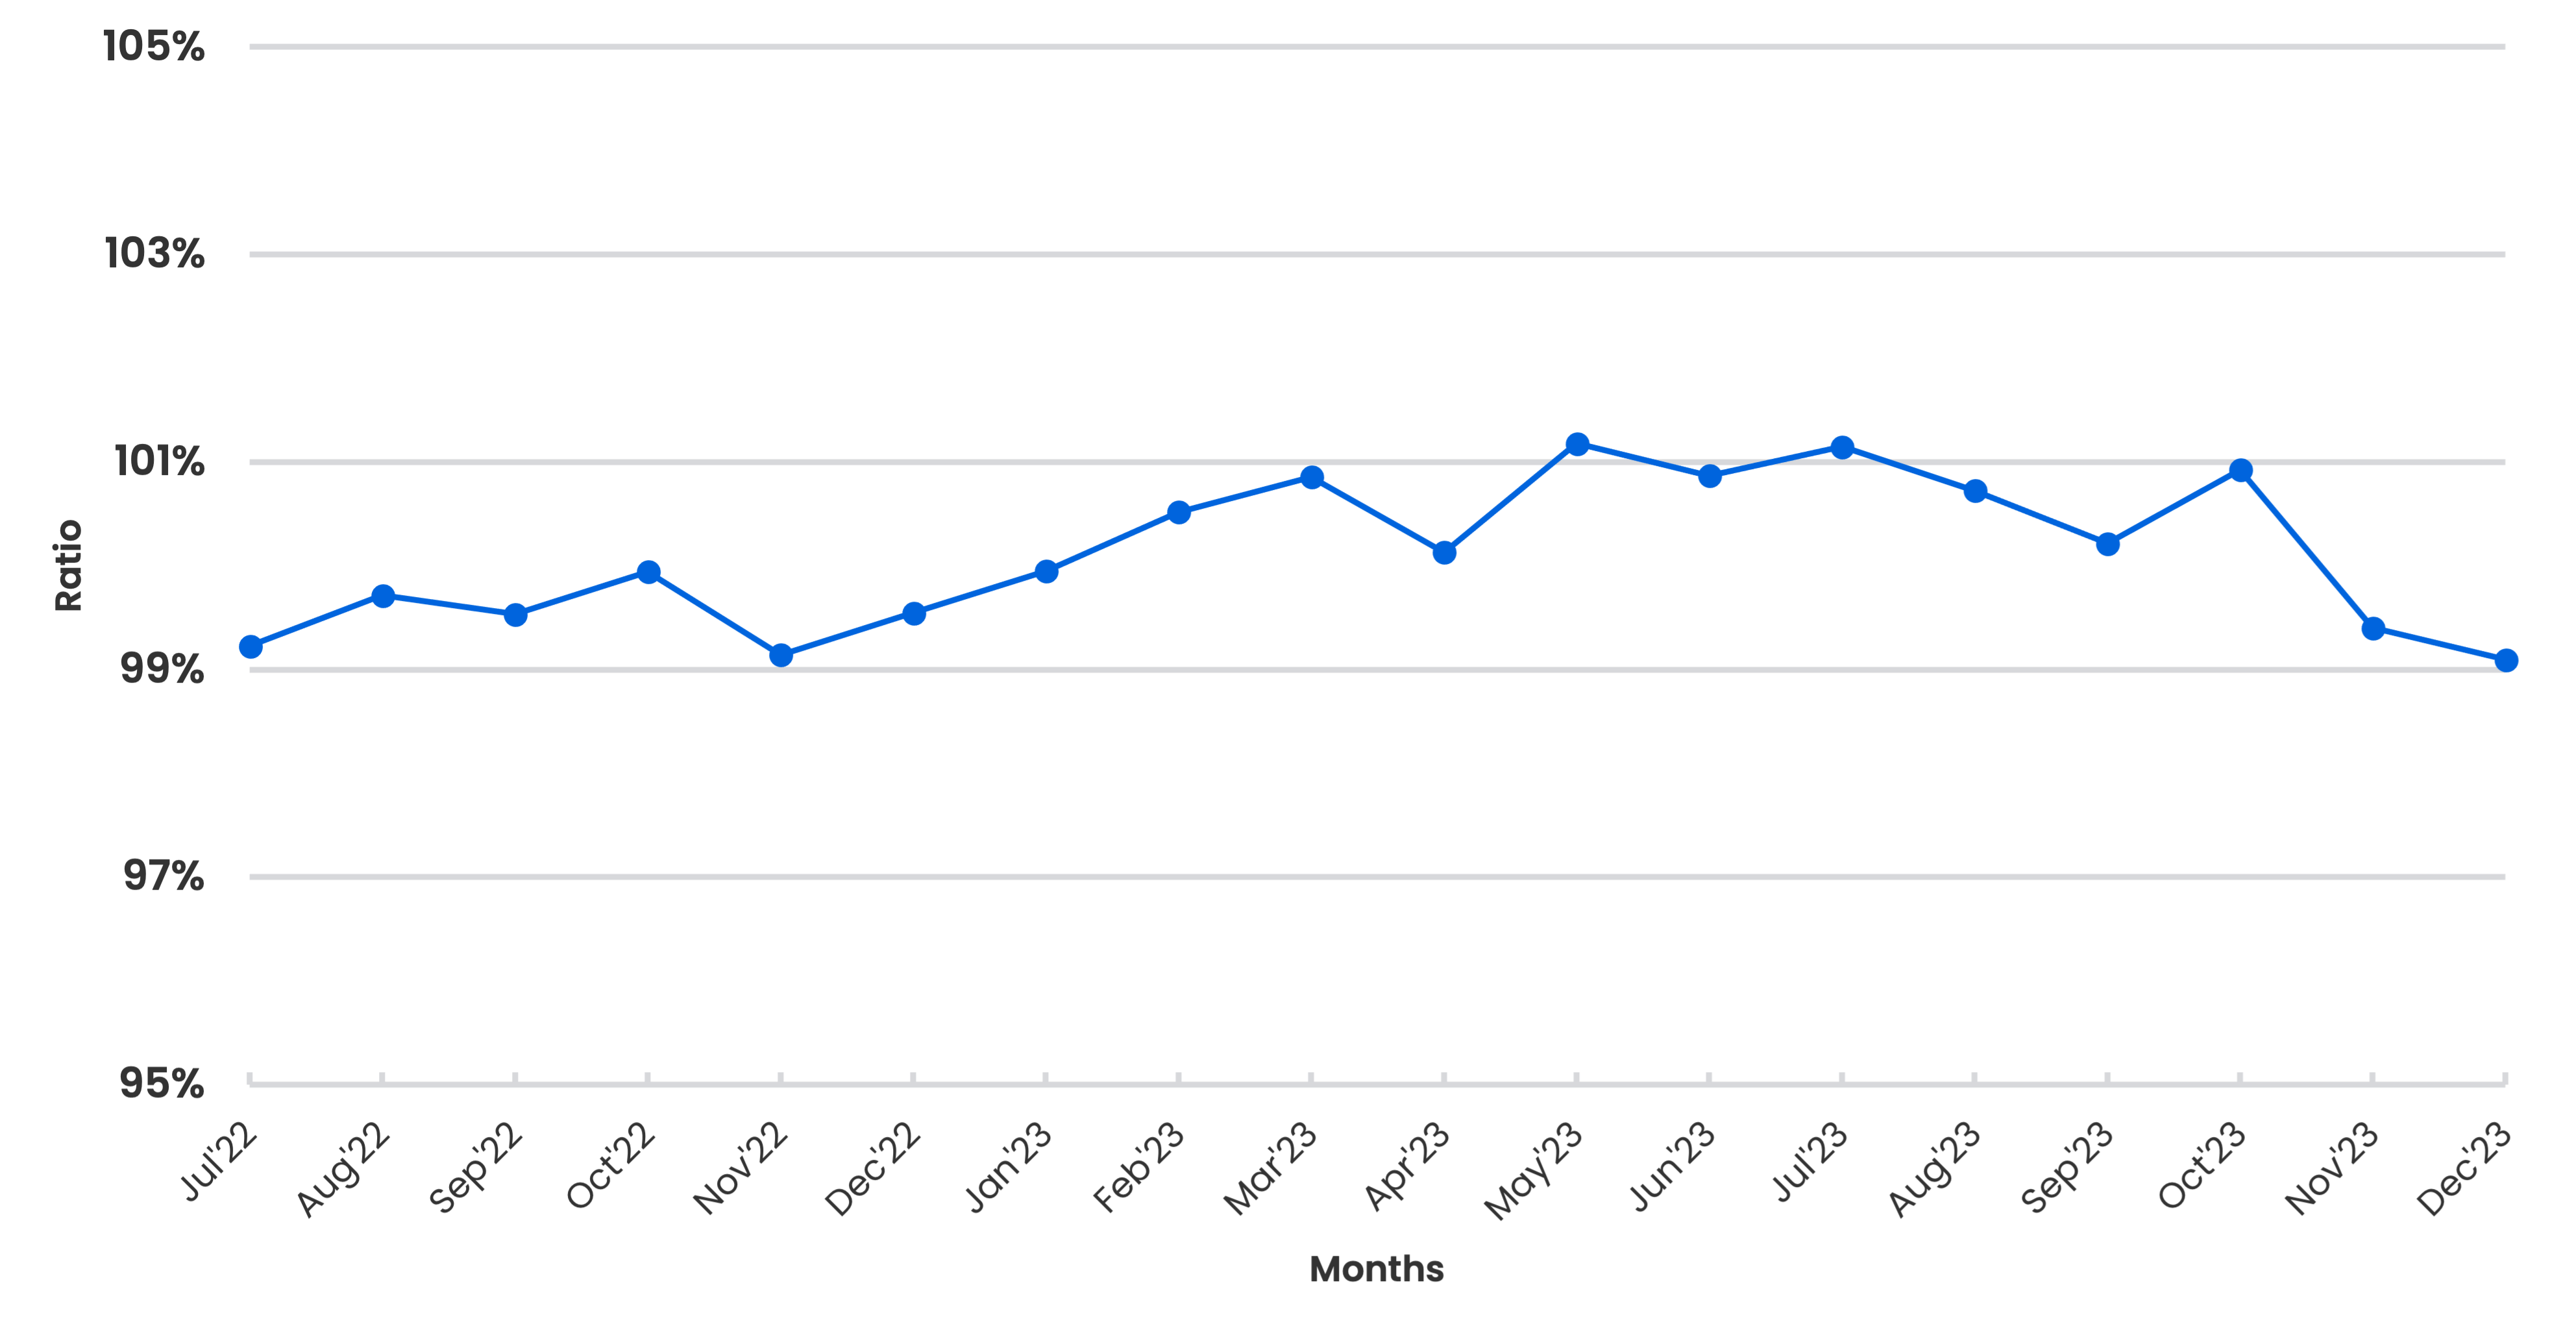 Line graph showing the revenue-to-expense ratio (Y-axis) reported by small businesses over time by months (X-axis). The line generally displays a flat trend, between a 99% and 101% revenue-to-expense ratio, over 18 months.